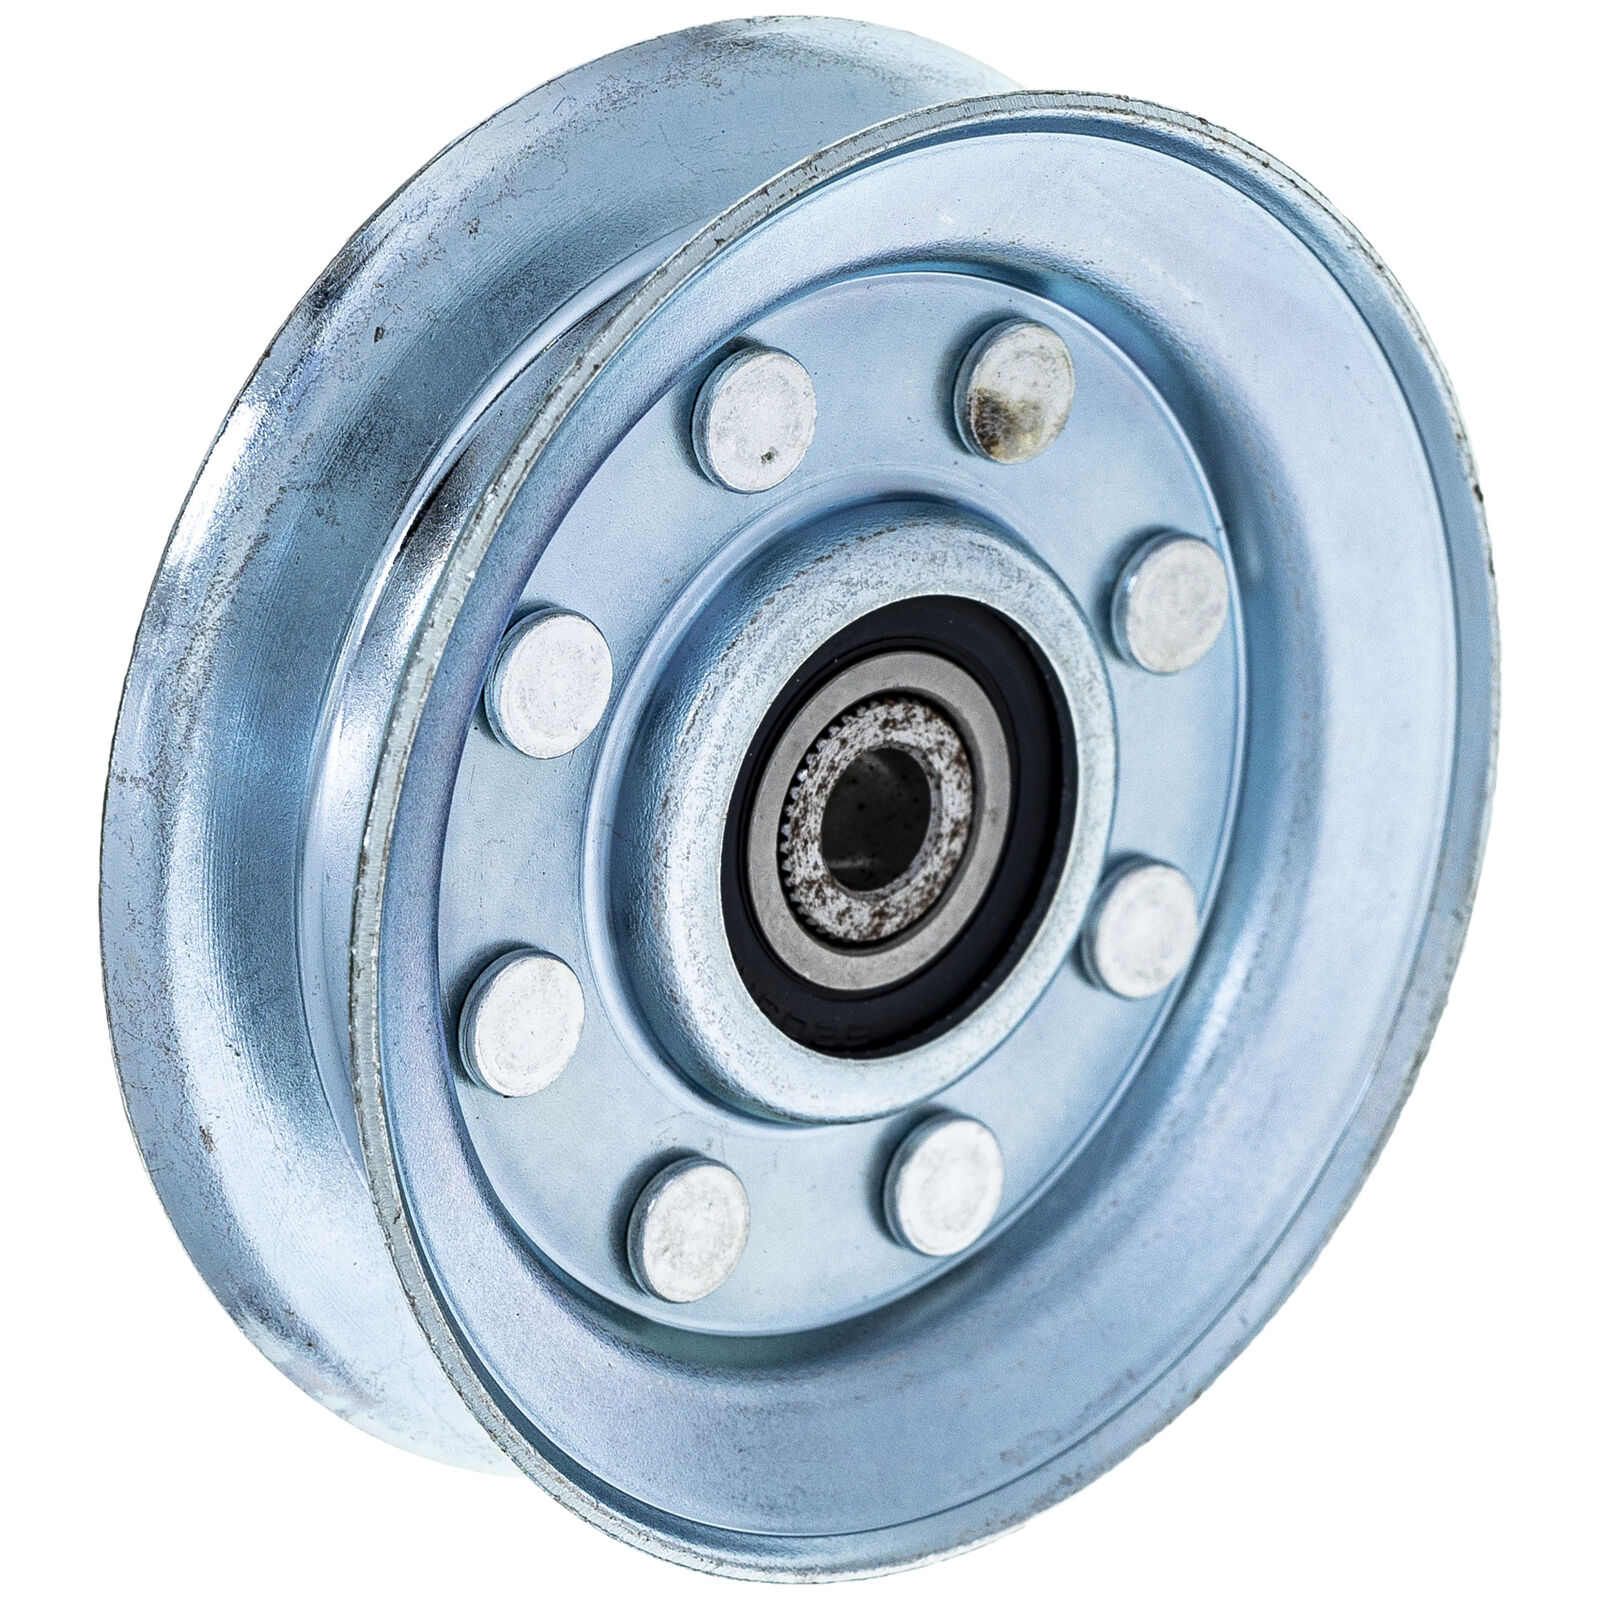 8TEN Idler Pulley for Murray Craftsman Snapper ZT7000 ZTS7500 1724387 1724387SM